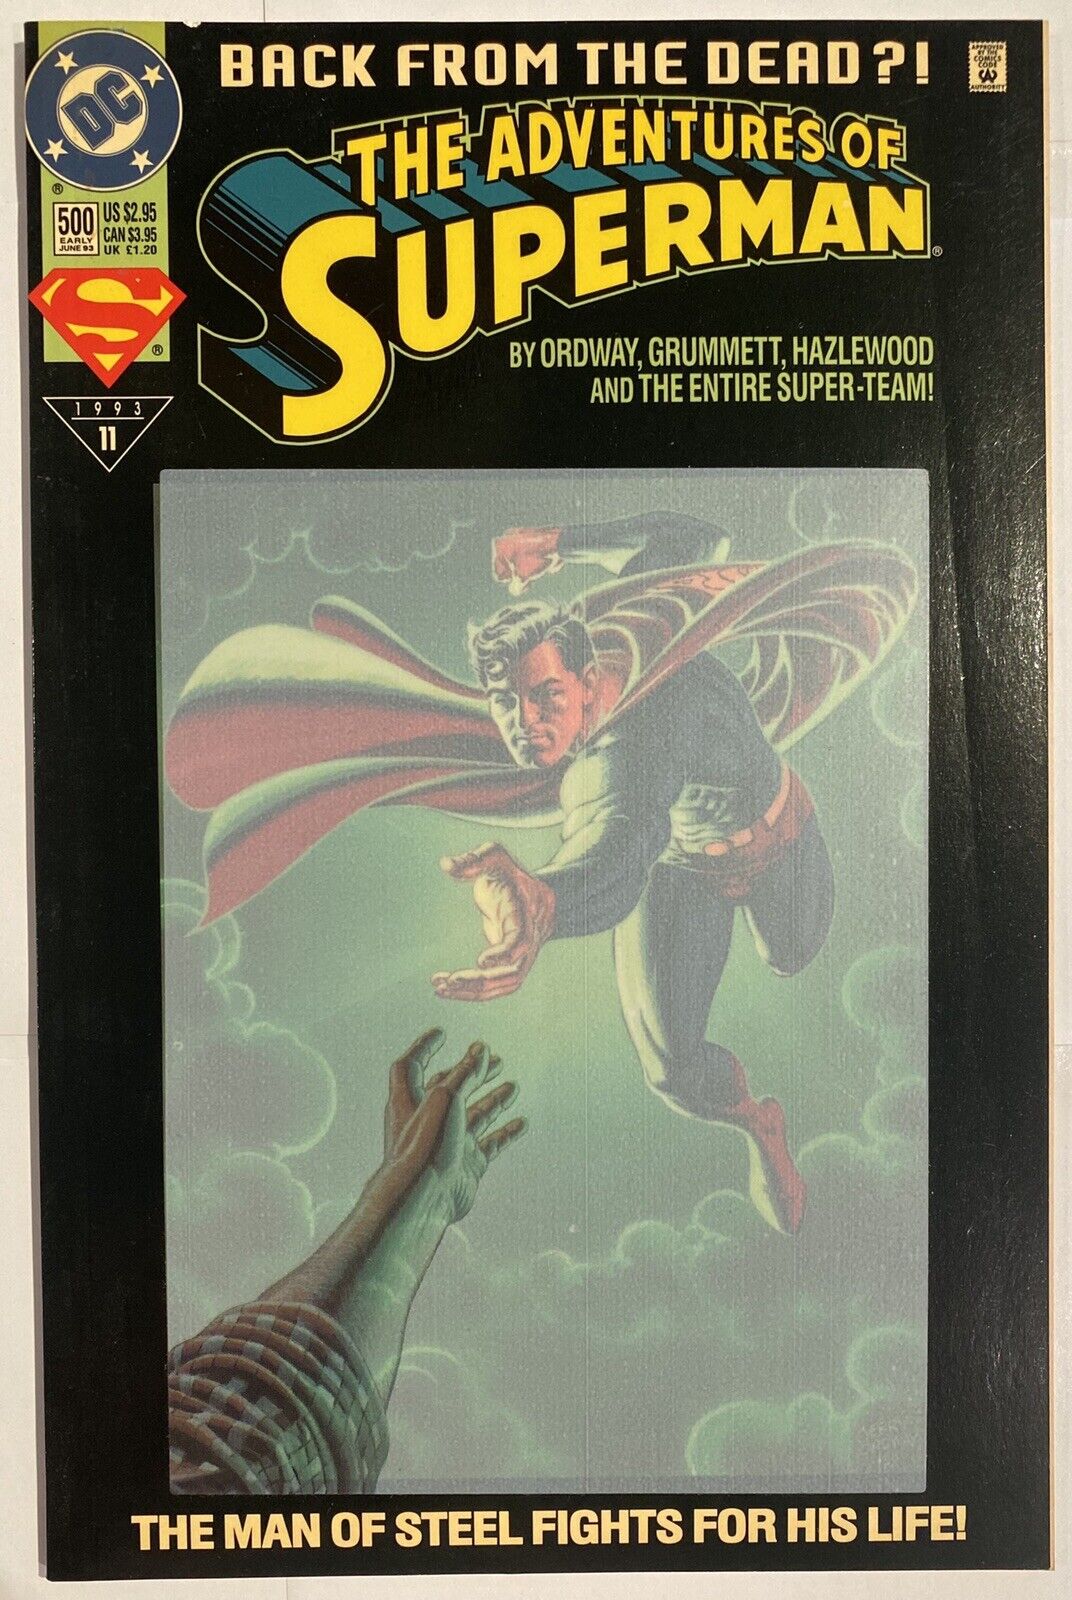 DC THE ADVENTURES OF SUPERMAN BACK FROM THE DEAD? 1993 #11 #500 EARLY JUNE 93